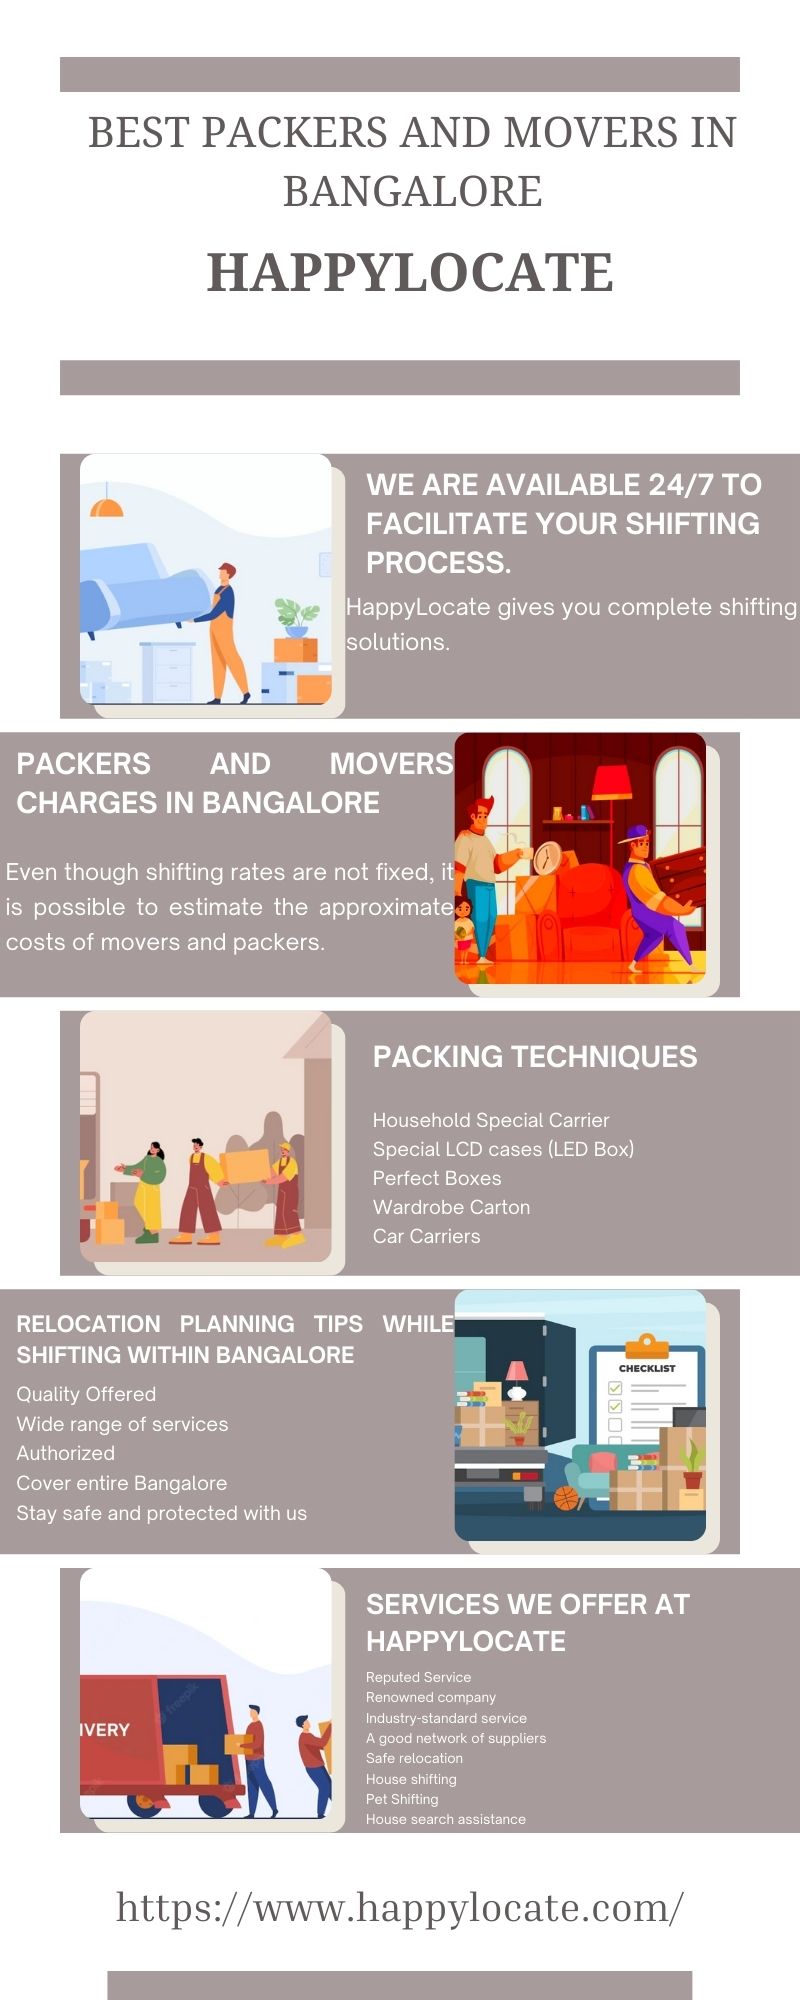 I
BEST PACKERS AND MOVERS IN
BANGALORE

HAPPYLOCATE
I

WE ARE AVAILABLE 24/7 TO
FACILITATE YOUR SHIFTING
PROCESS.

PEHappylLocate gives you complete shifting
solutions.

   
     
    
 
 
  
     
 
 
     
     
 
 
   
  
     

   

PACKERS AND L(edV 3:5
CHARGES IN BANGALORE

 

Even though shifting rates are not fixed, it v, 4
is possible to estimate the approximate ]
costs of movers and packers.

i

PACKING TECHNIQUES

Household Special Carmer
Special LCD cases (LED Box)
Perfect Boxes

Wardrobe Carton

Car Carriers

 

RELOCATION PLANNING TIPS WHILE
SHIFTING WITHIN BANGALORE

Quality Offered +e
Wide range of services eo
WLI Z]

Cover entire Bangalore
Stay safe and protected with us

SERVICES WE OFFER AT
HAPPYLOCATE

Rag

pany

https://www.happylocate.com/